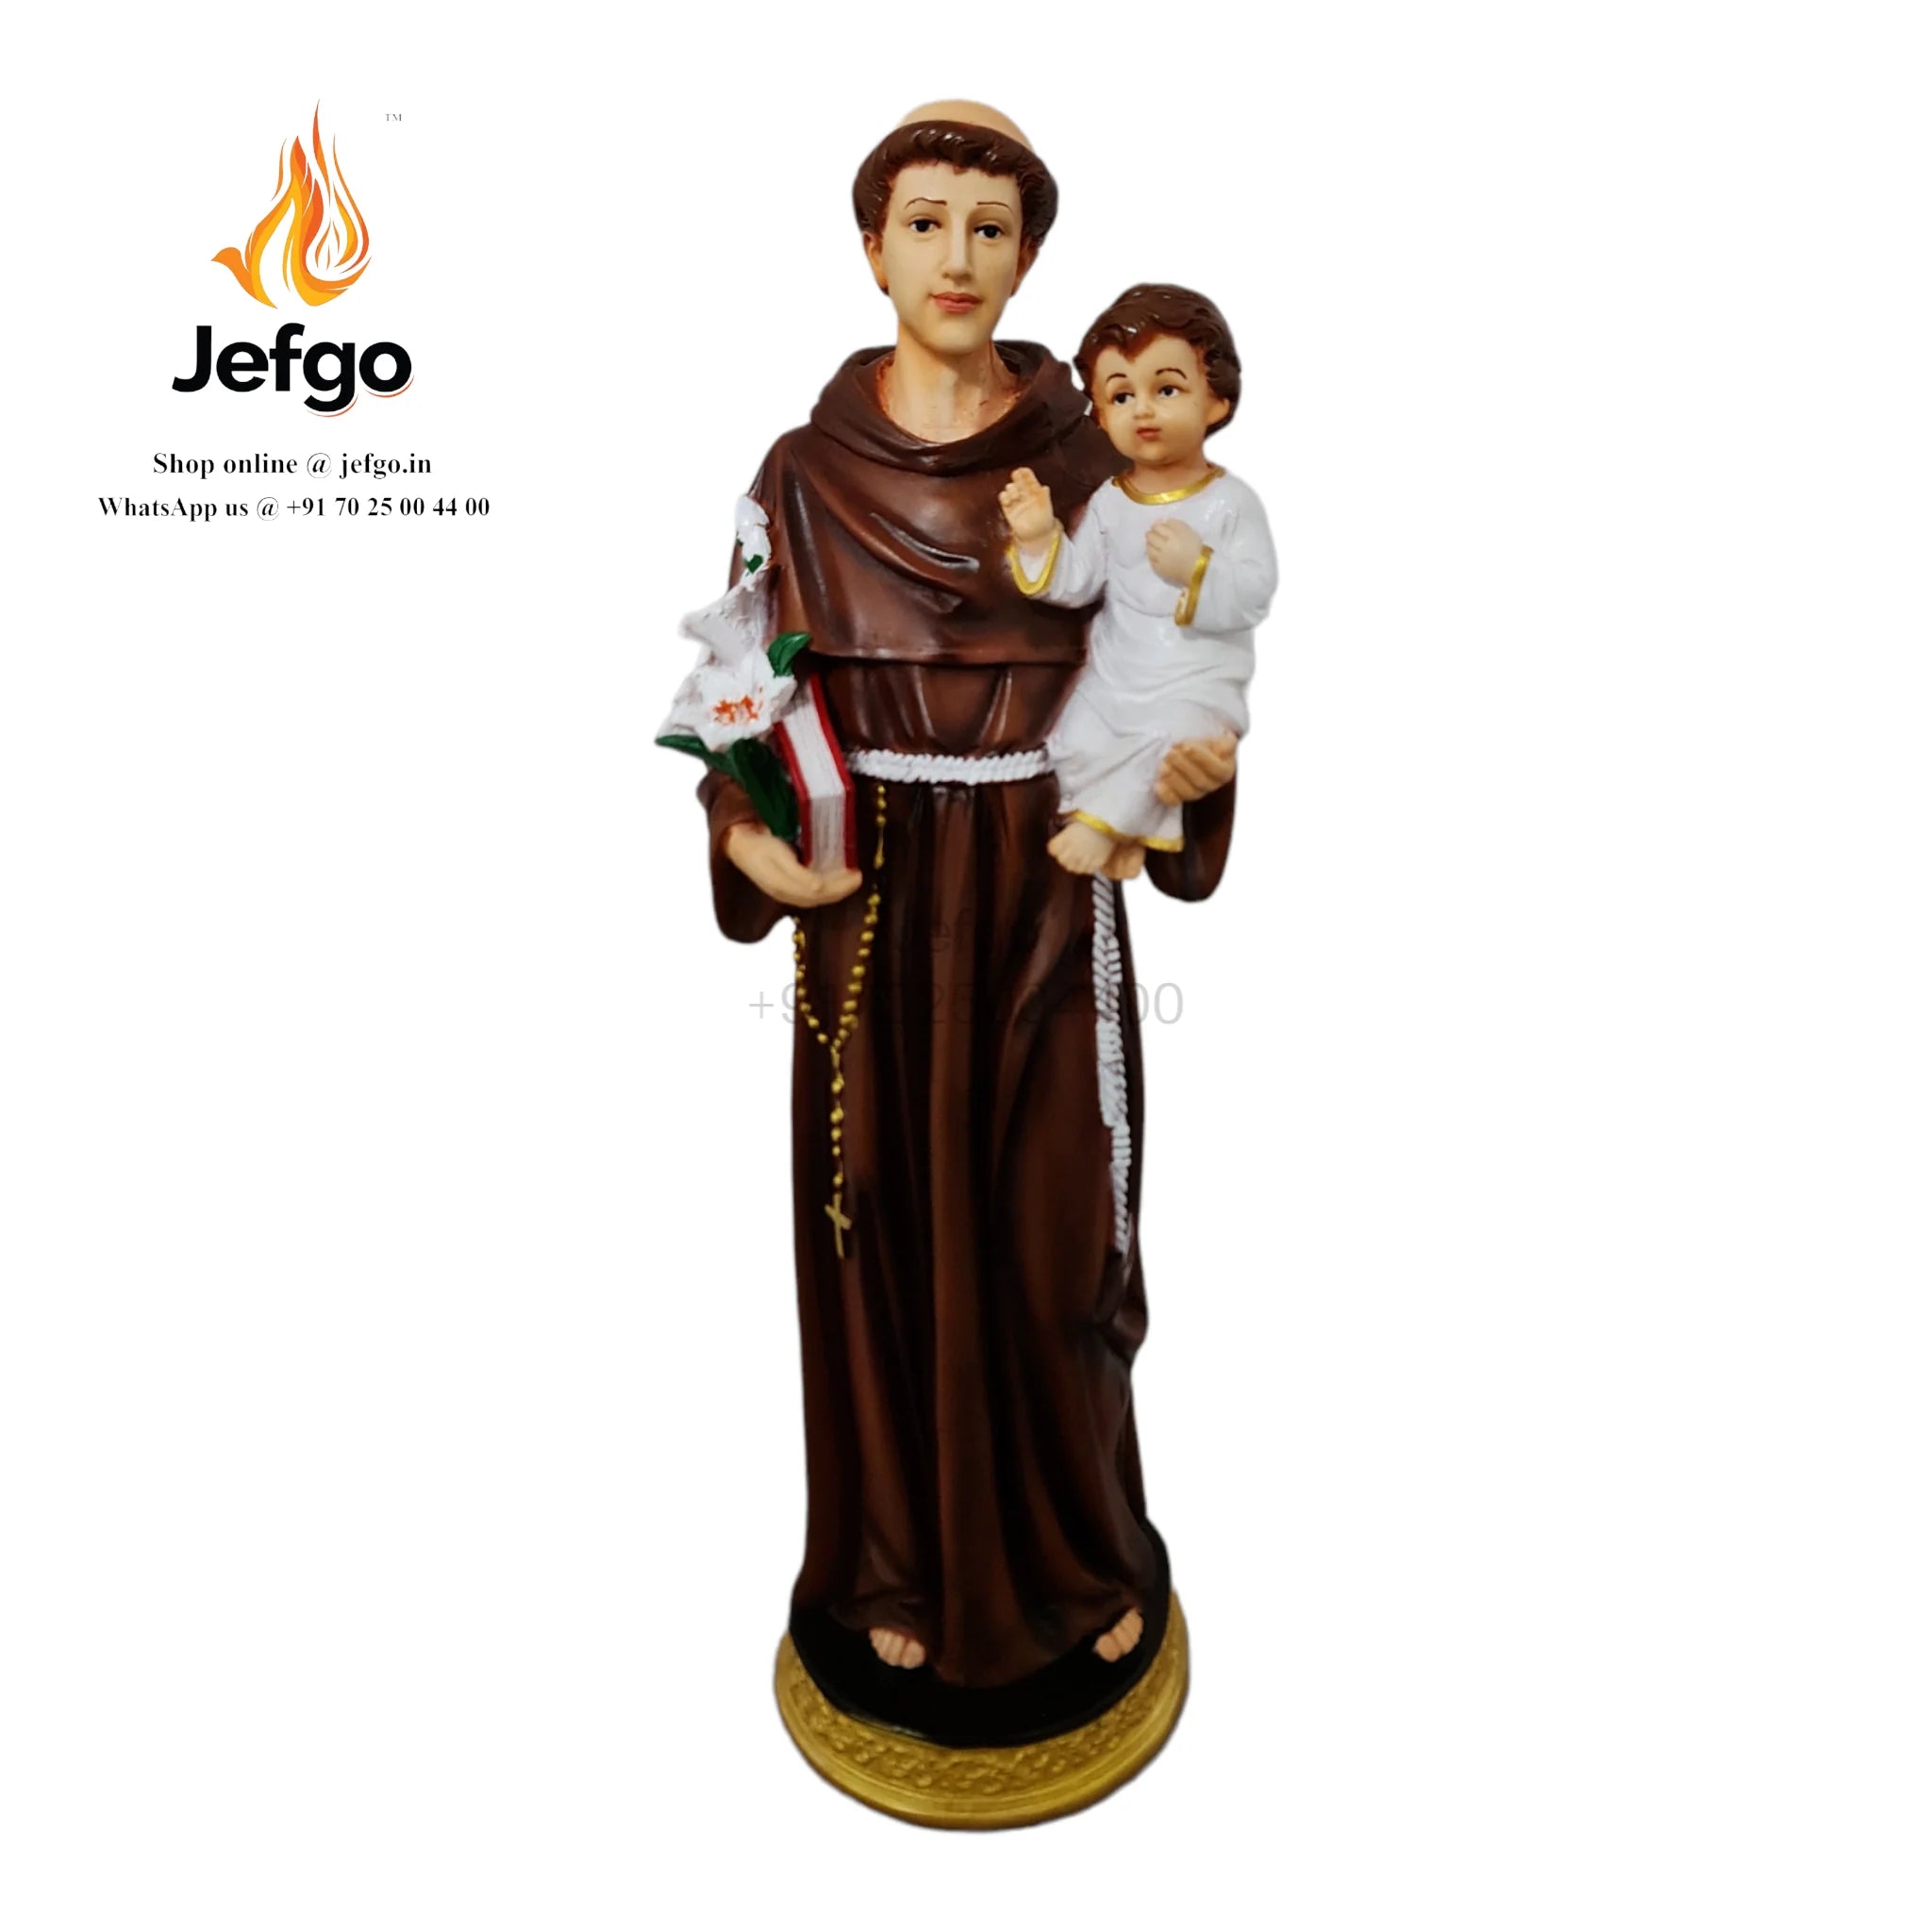 Buy St Anthony of Padua Statue online India